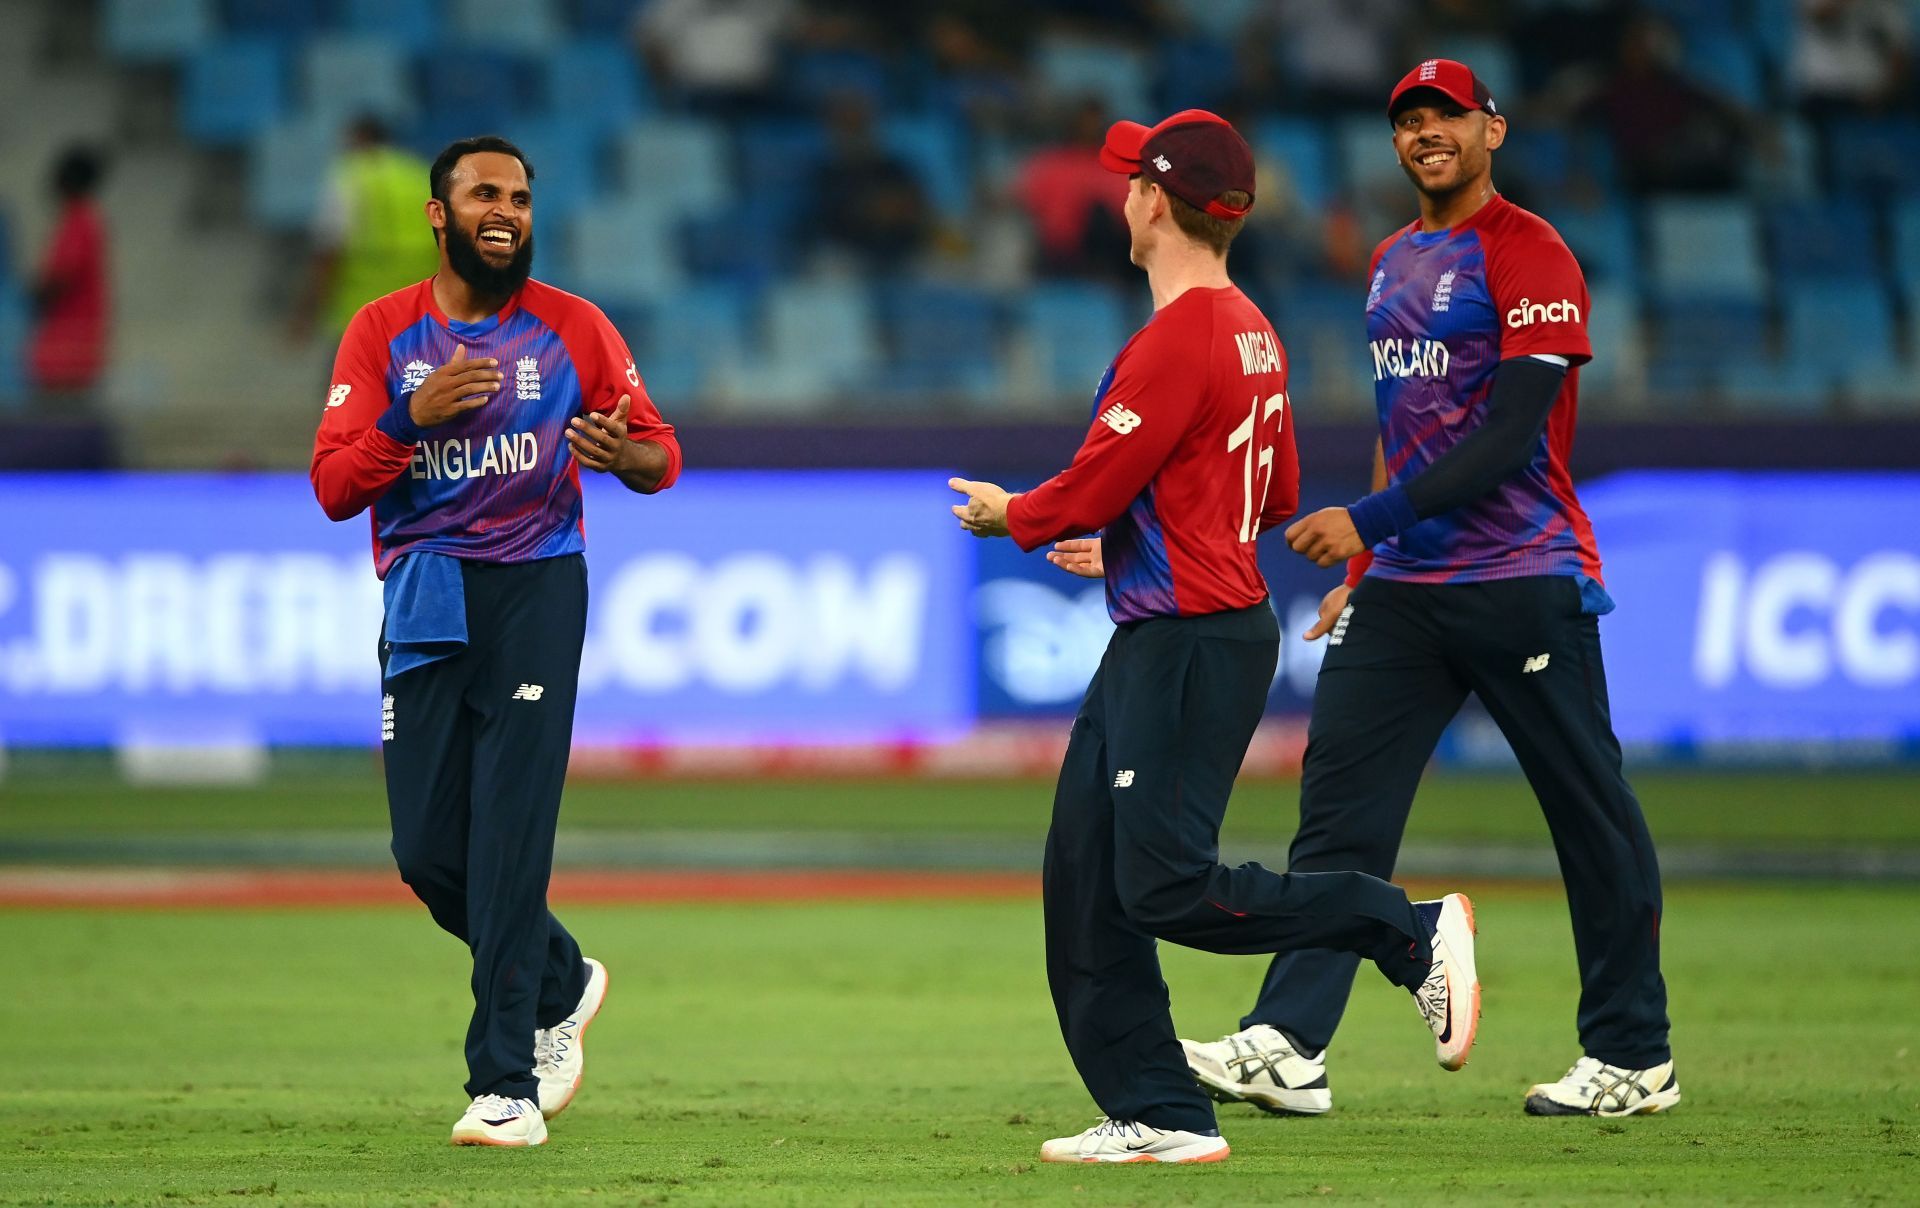 Morgan used Rashid to superb effect at the 2021 T20 World Cup